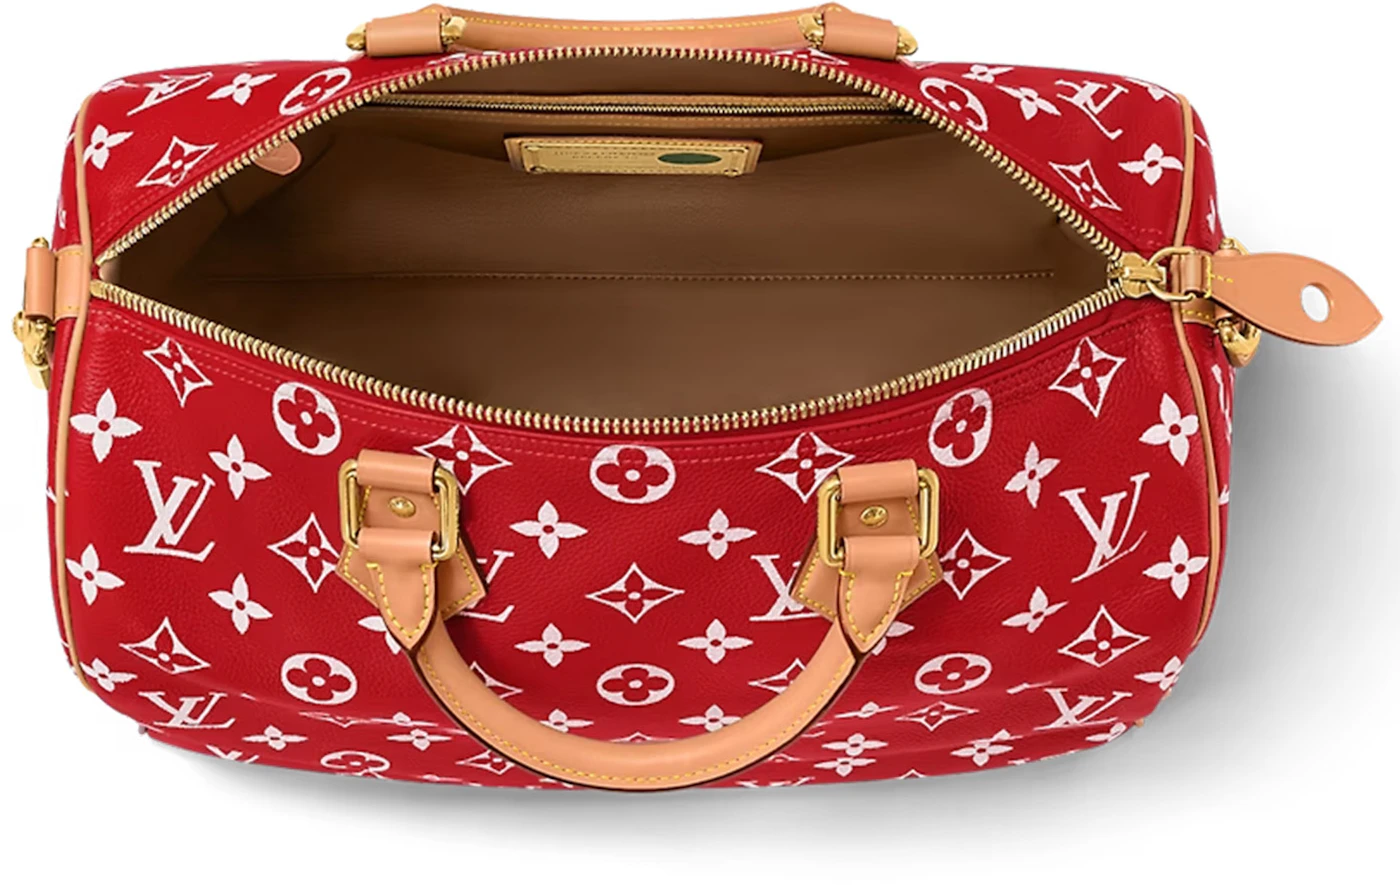 Louis Vuitton Speedy P9 Bandoulière 40 Monogram Leather Red in Soft ...